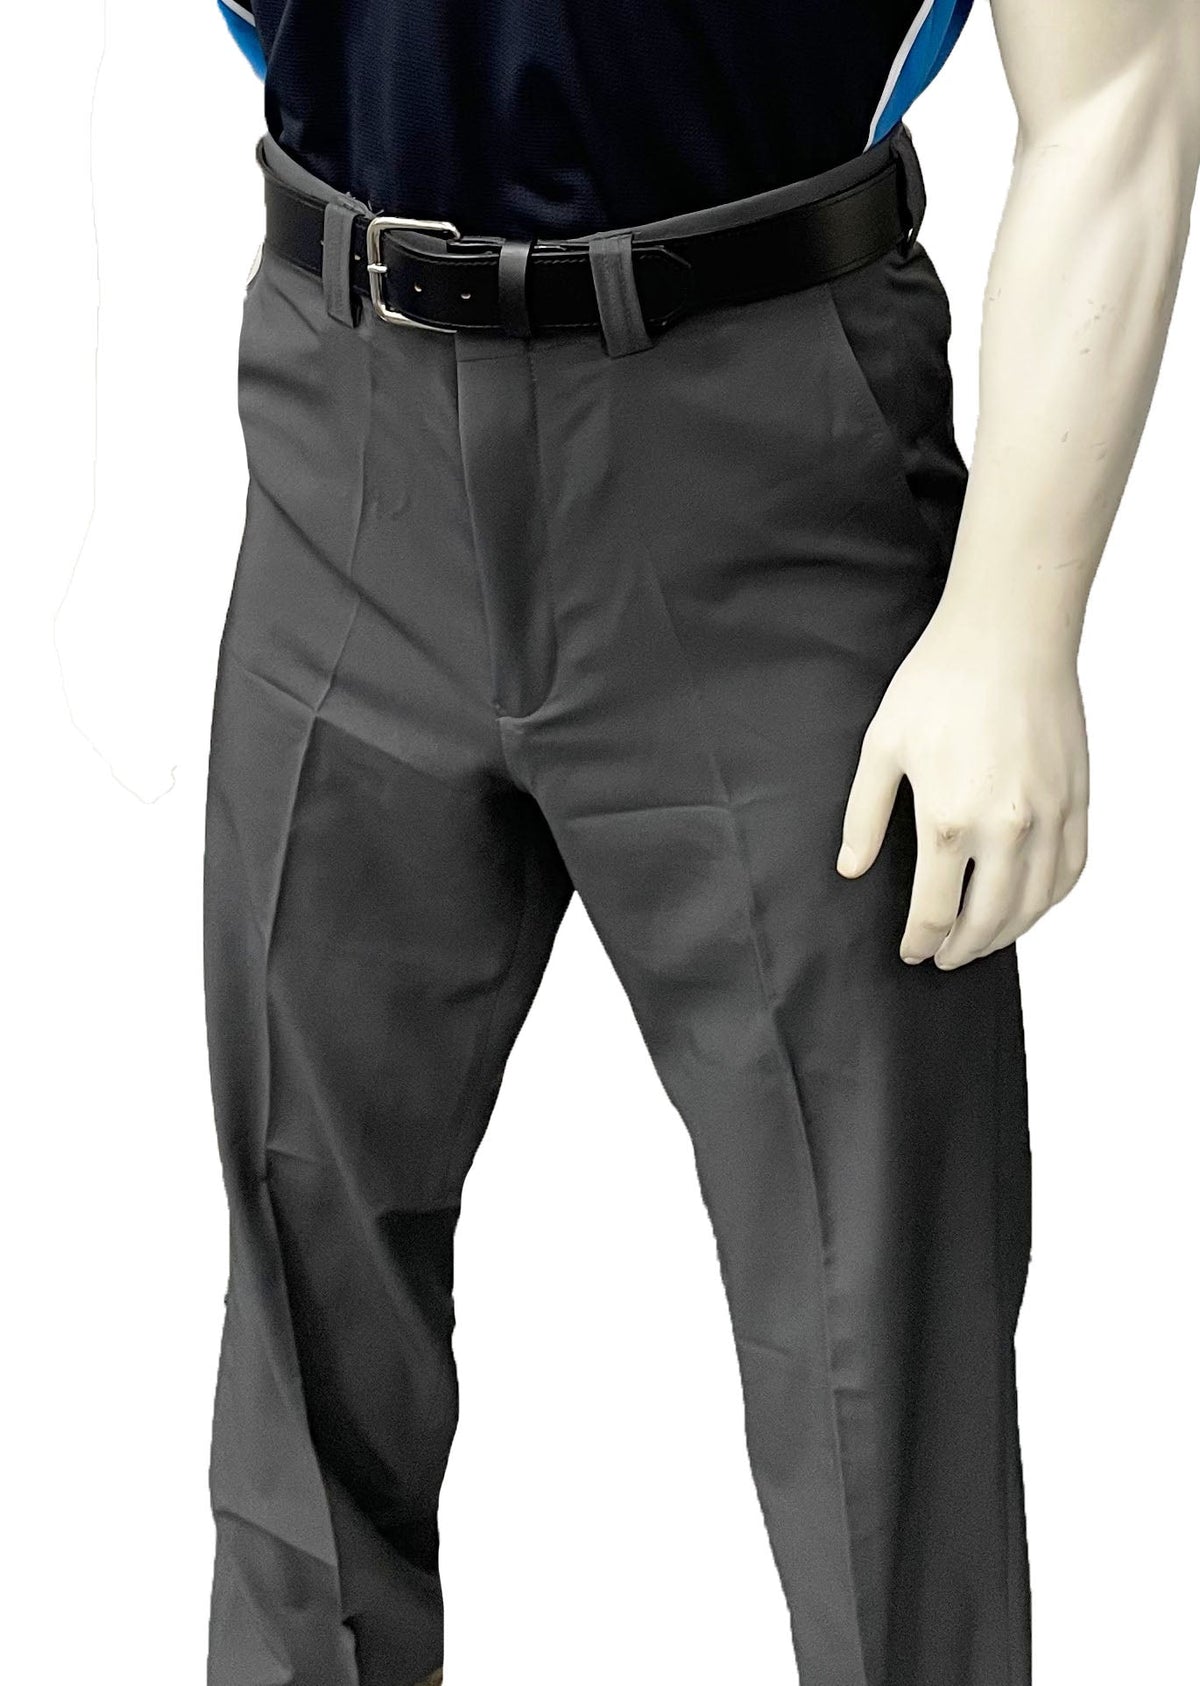 Smitty | BBS-356 | 4-Way Stretch Flat Front Base Umpire Pants w/ Expander Waistband | Charcoal Grey